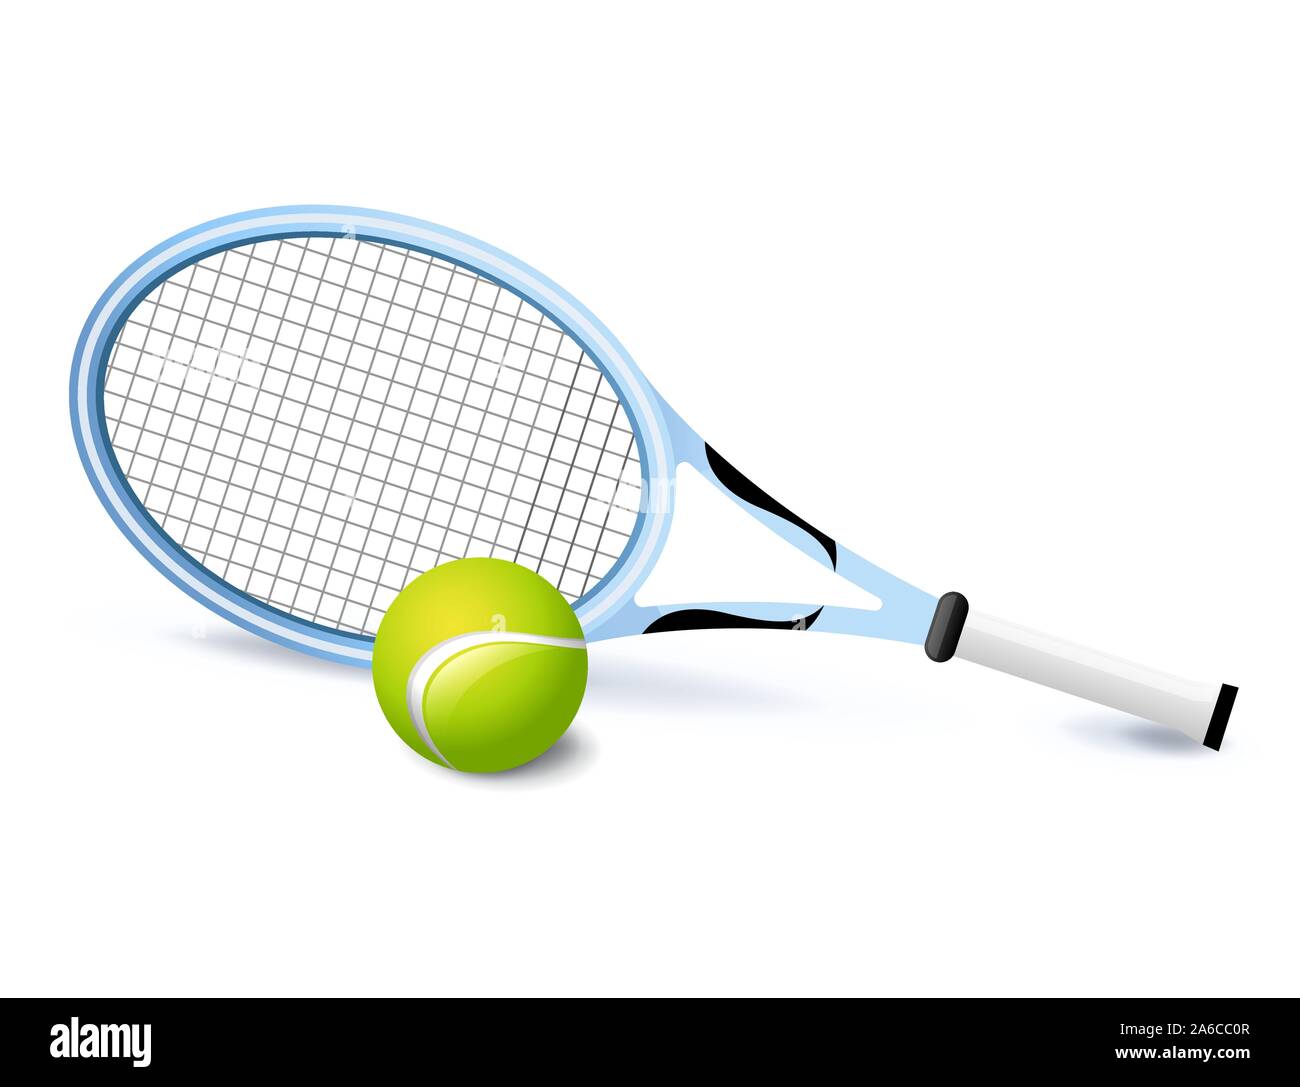 Ball string tennis racket Stock Vector Images - Alamy